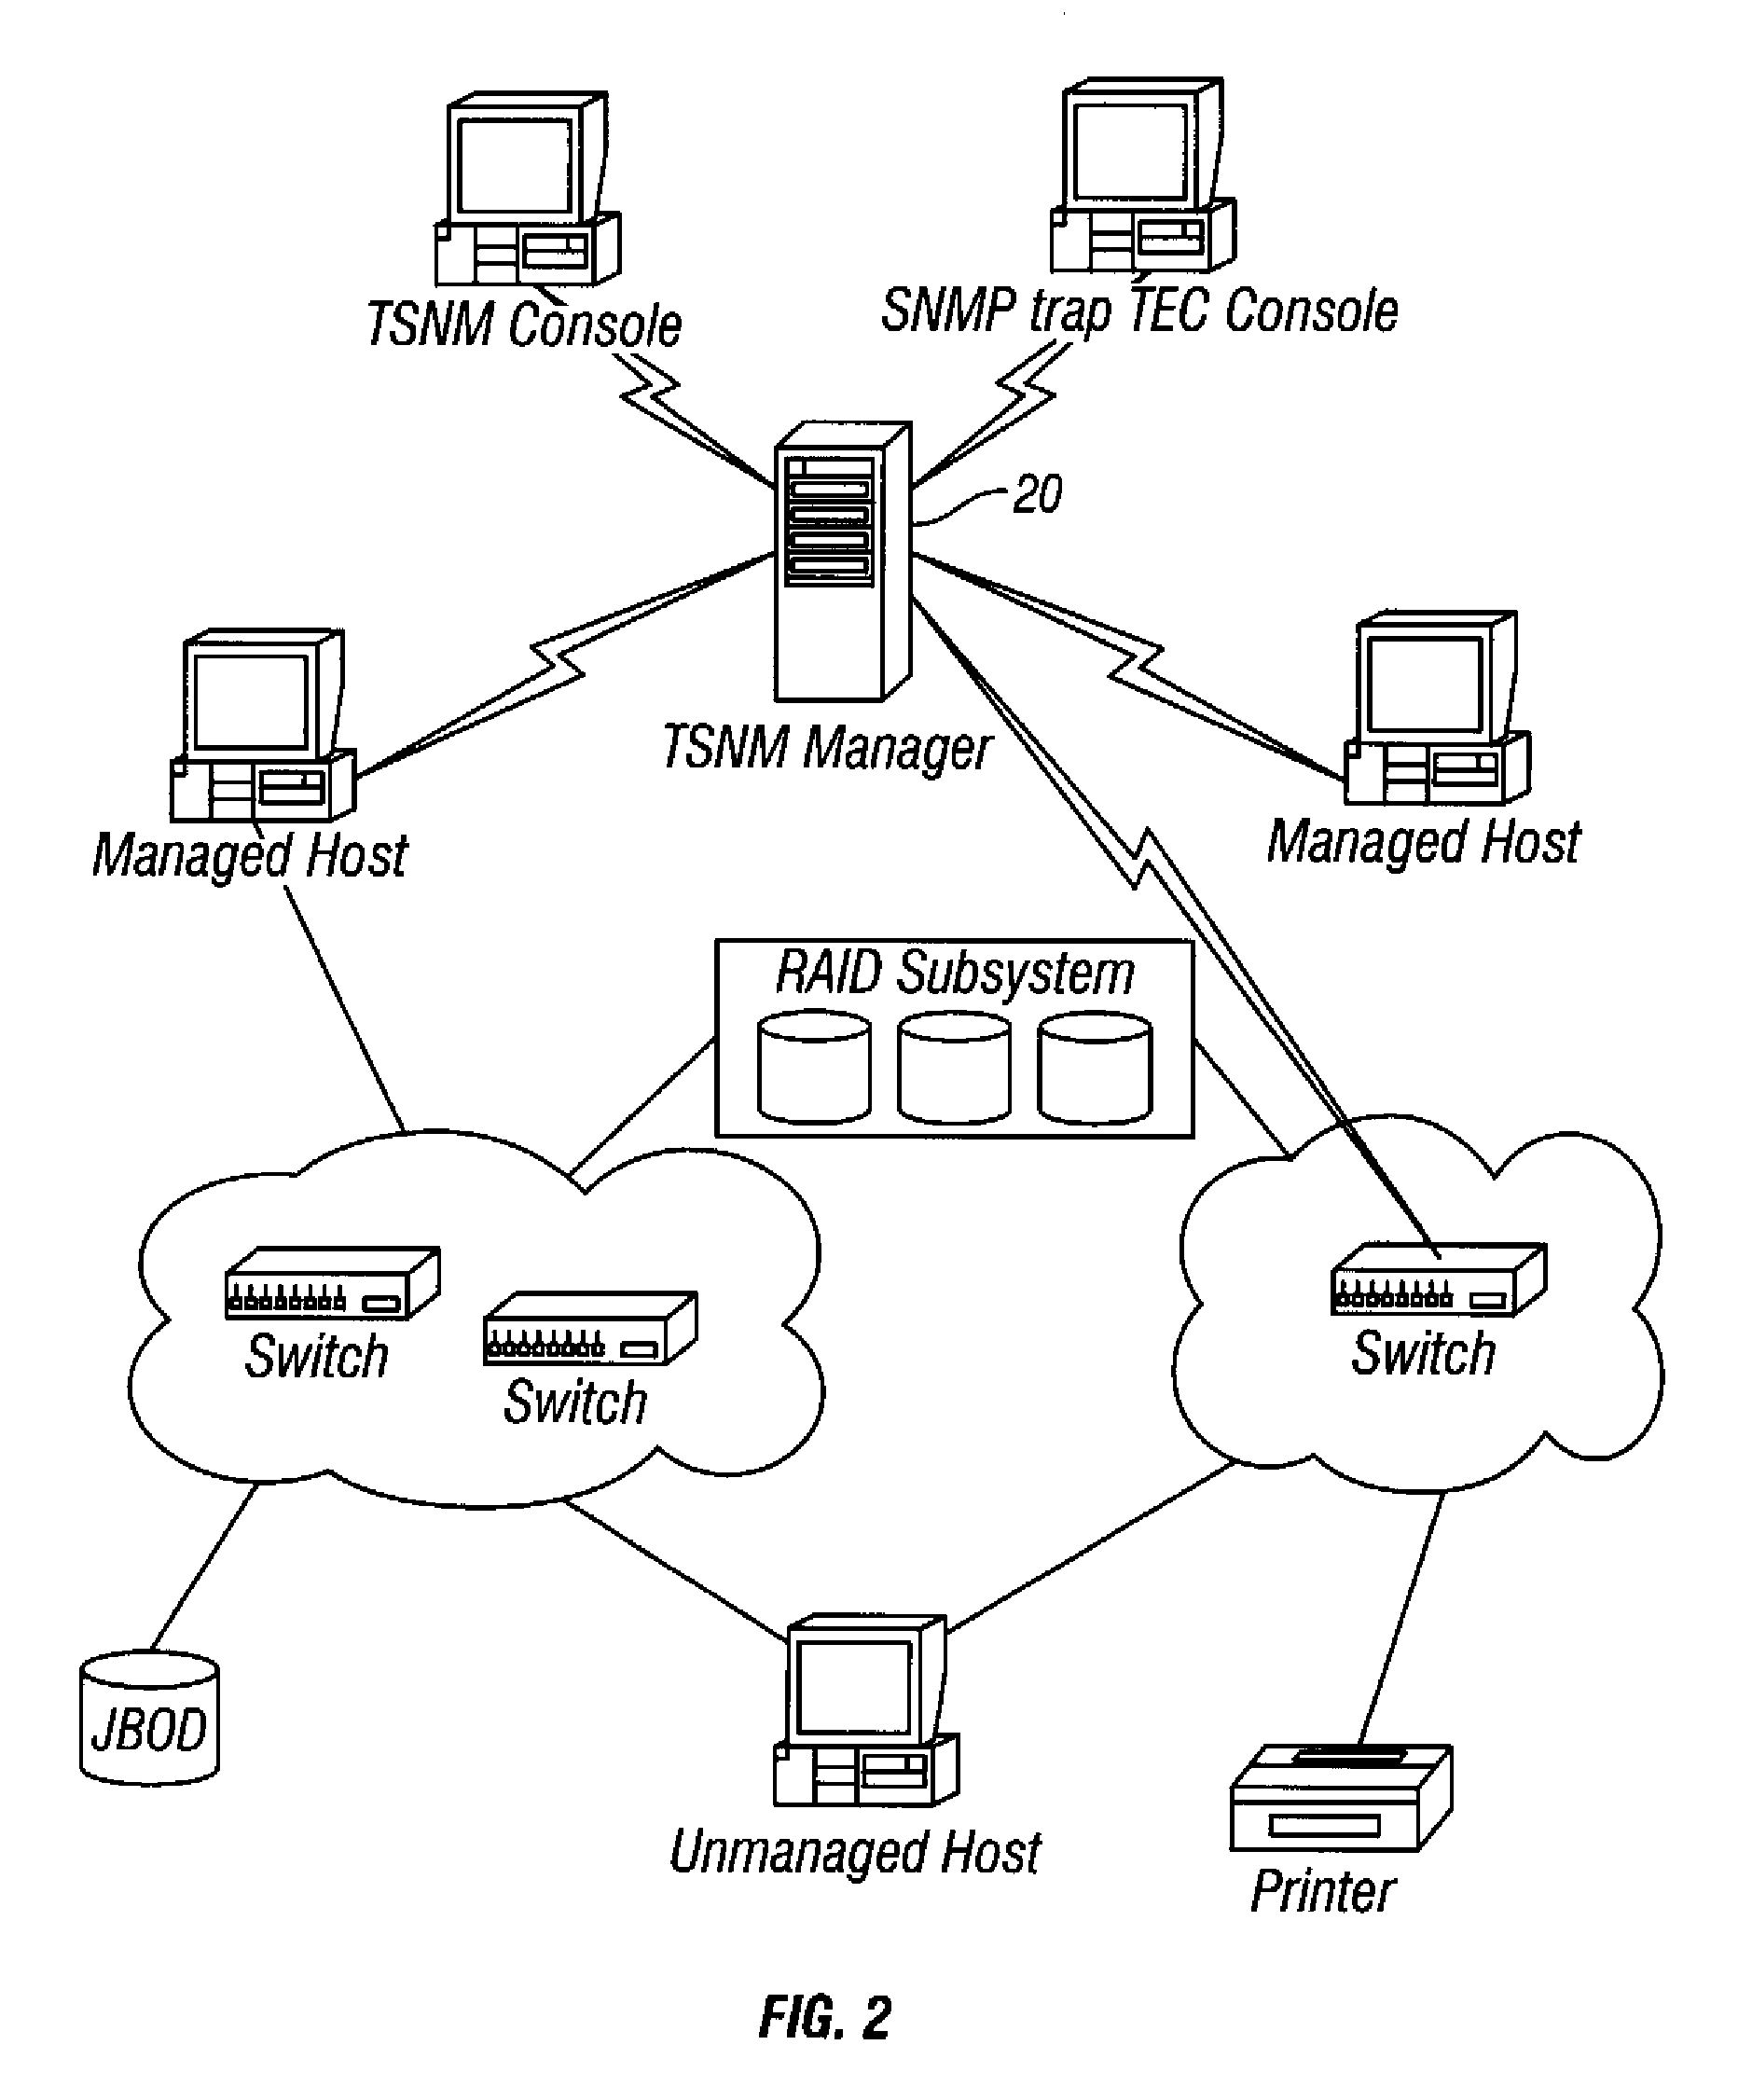 User interface architecture for storage area network